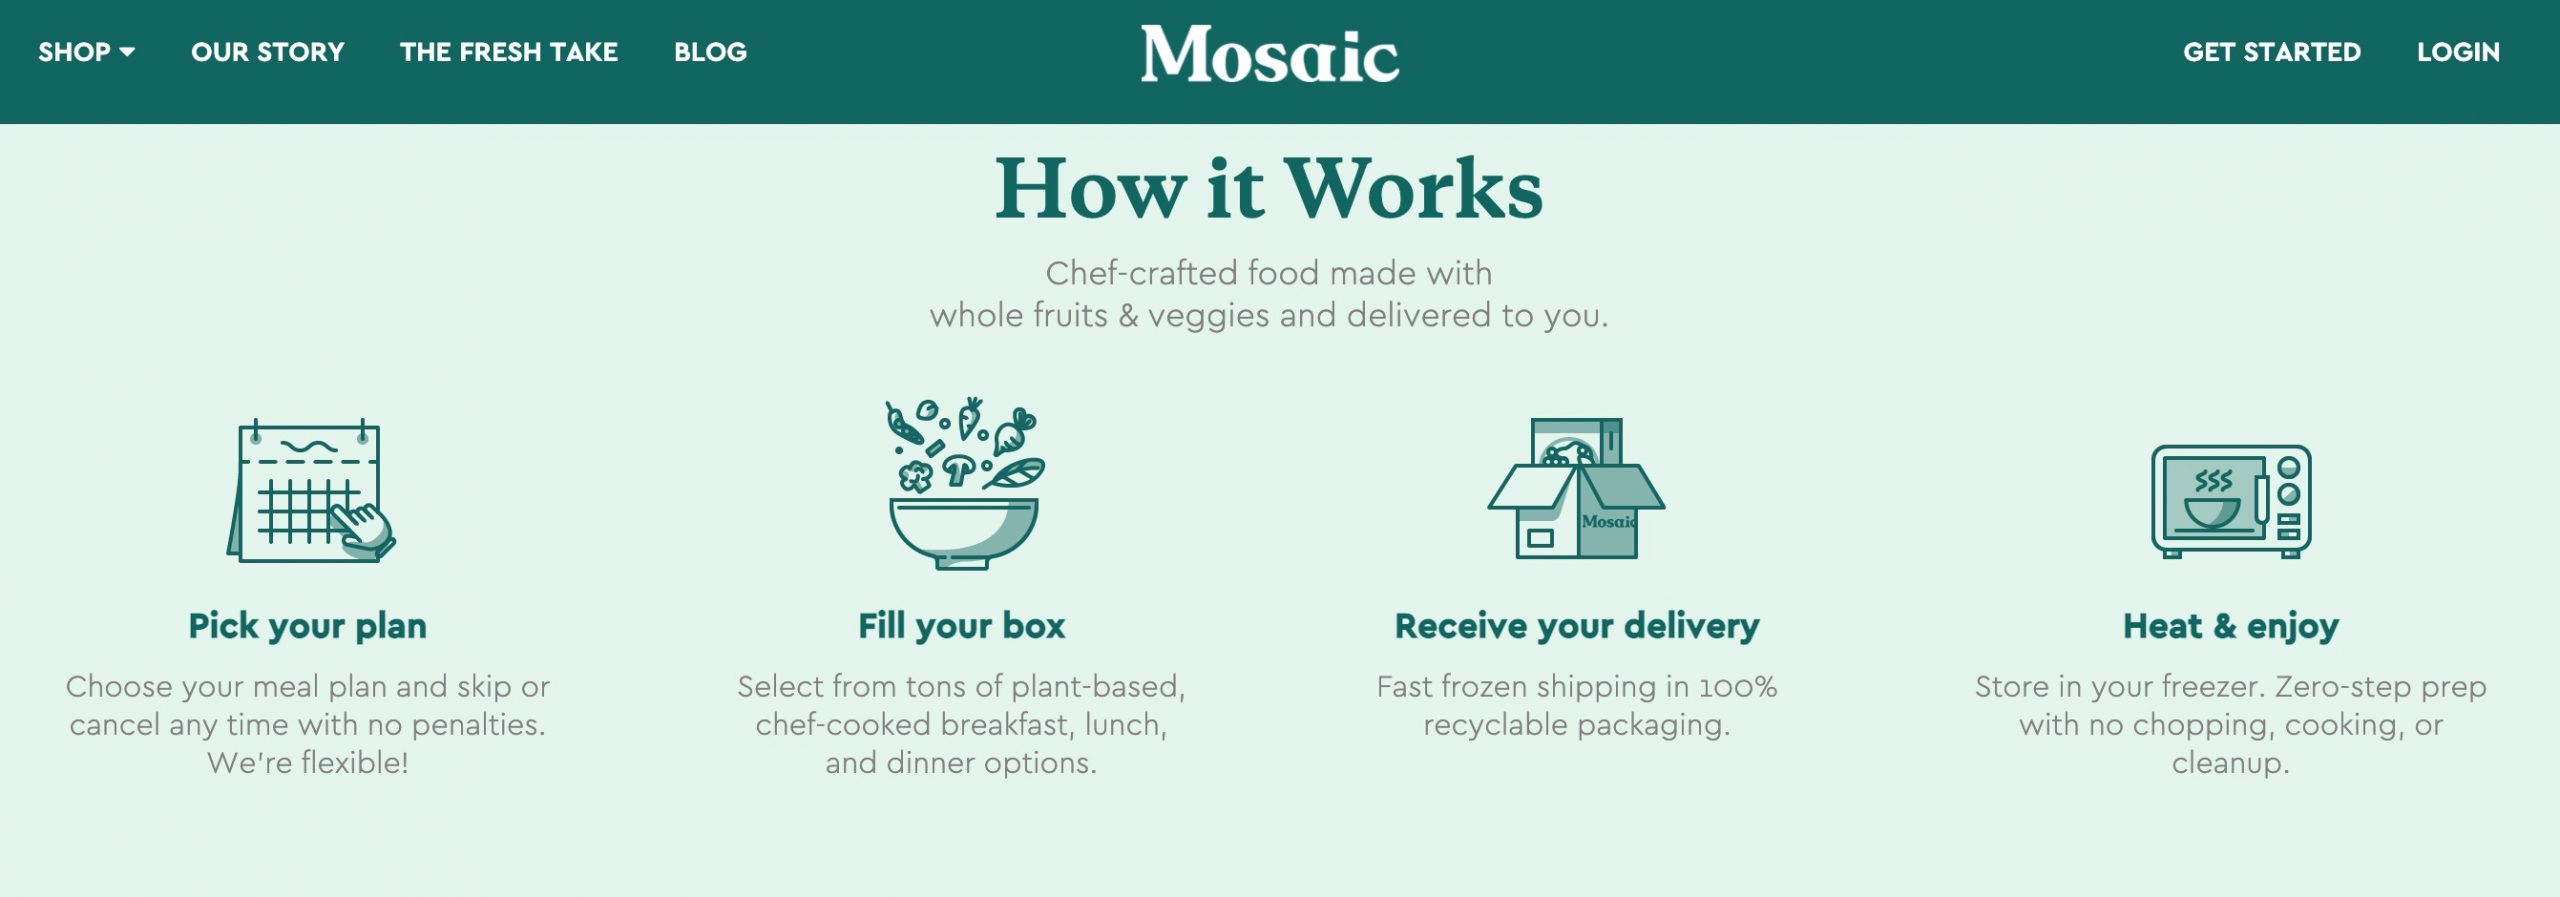 Mosaic Foods how it works